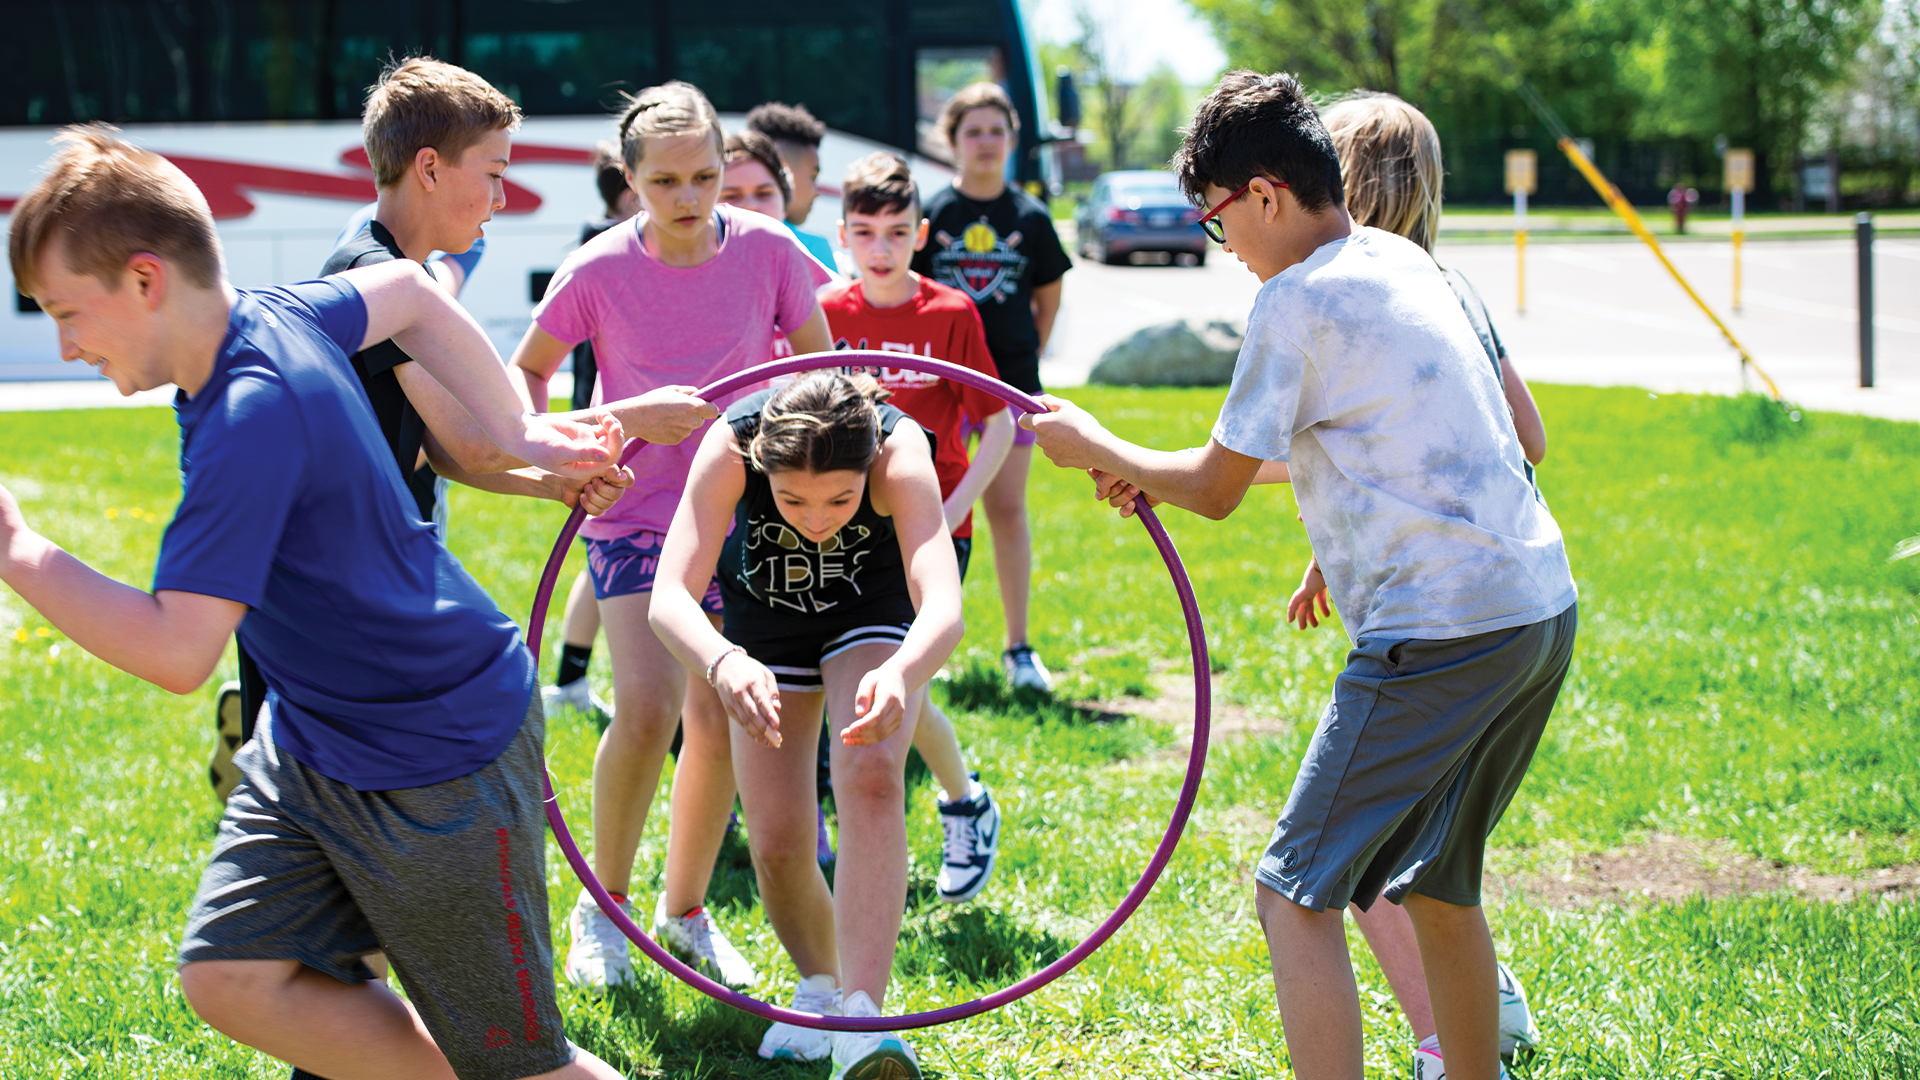 A group of youth playing a game, all looking excited and engaged in playing. One is running away of completing their part, two are hold a hula hoop sideways, and a line has forms with individuals attempting to run through the hula hoop.